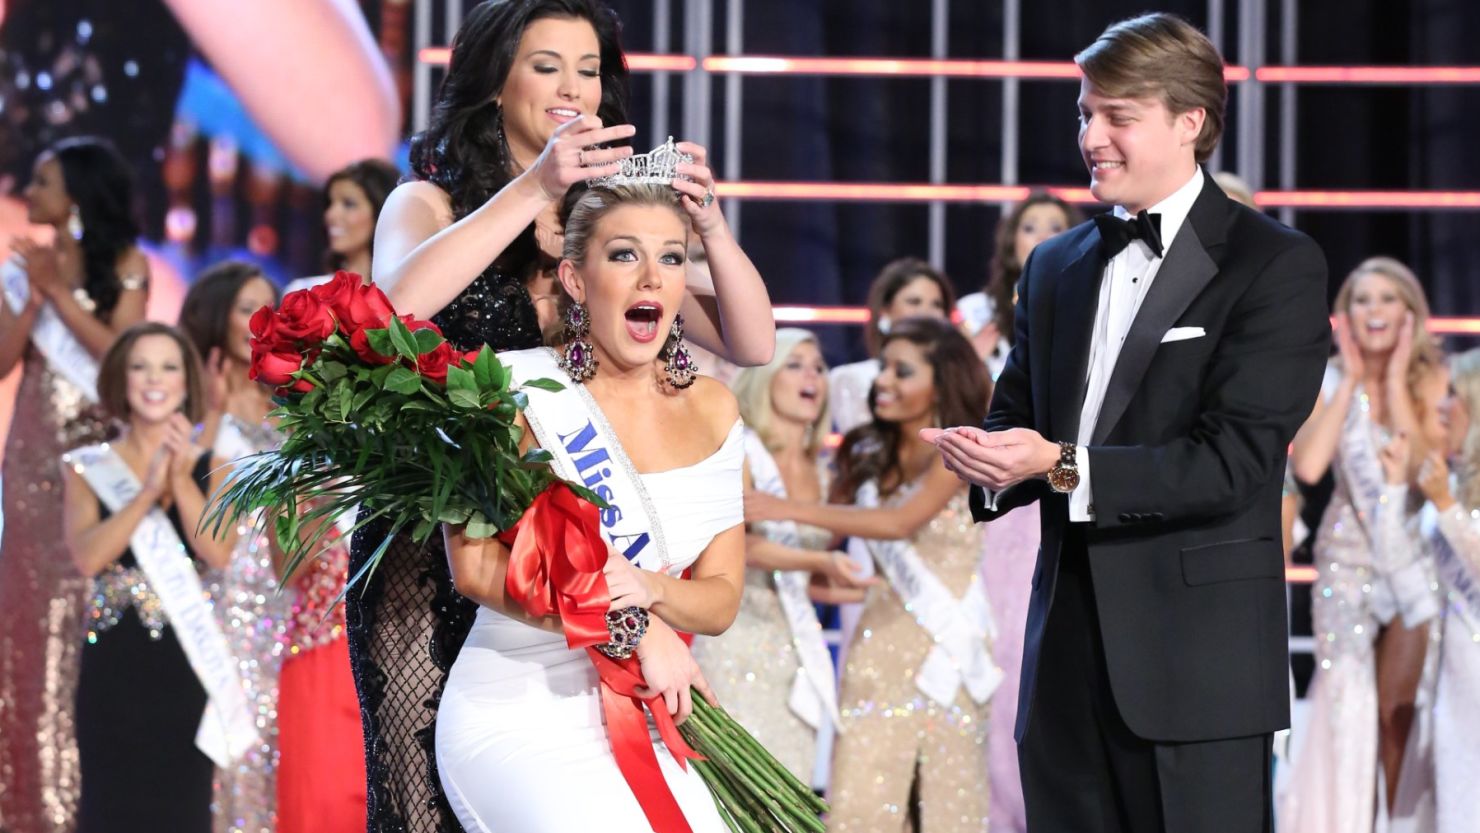 Mallory Hytes Hagan of New York was crowned as Miss America 2013.
